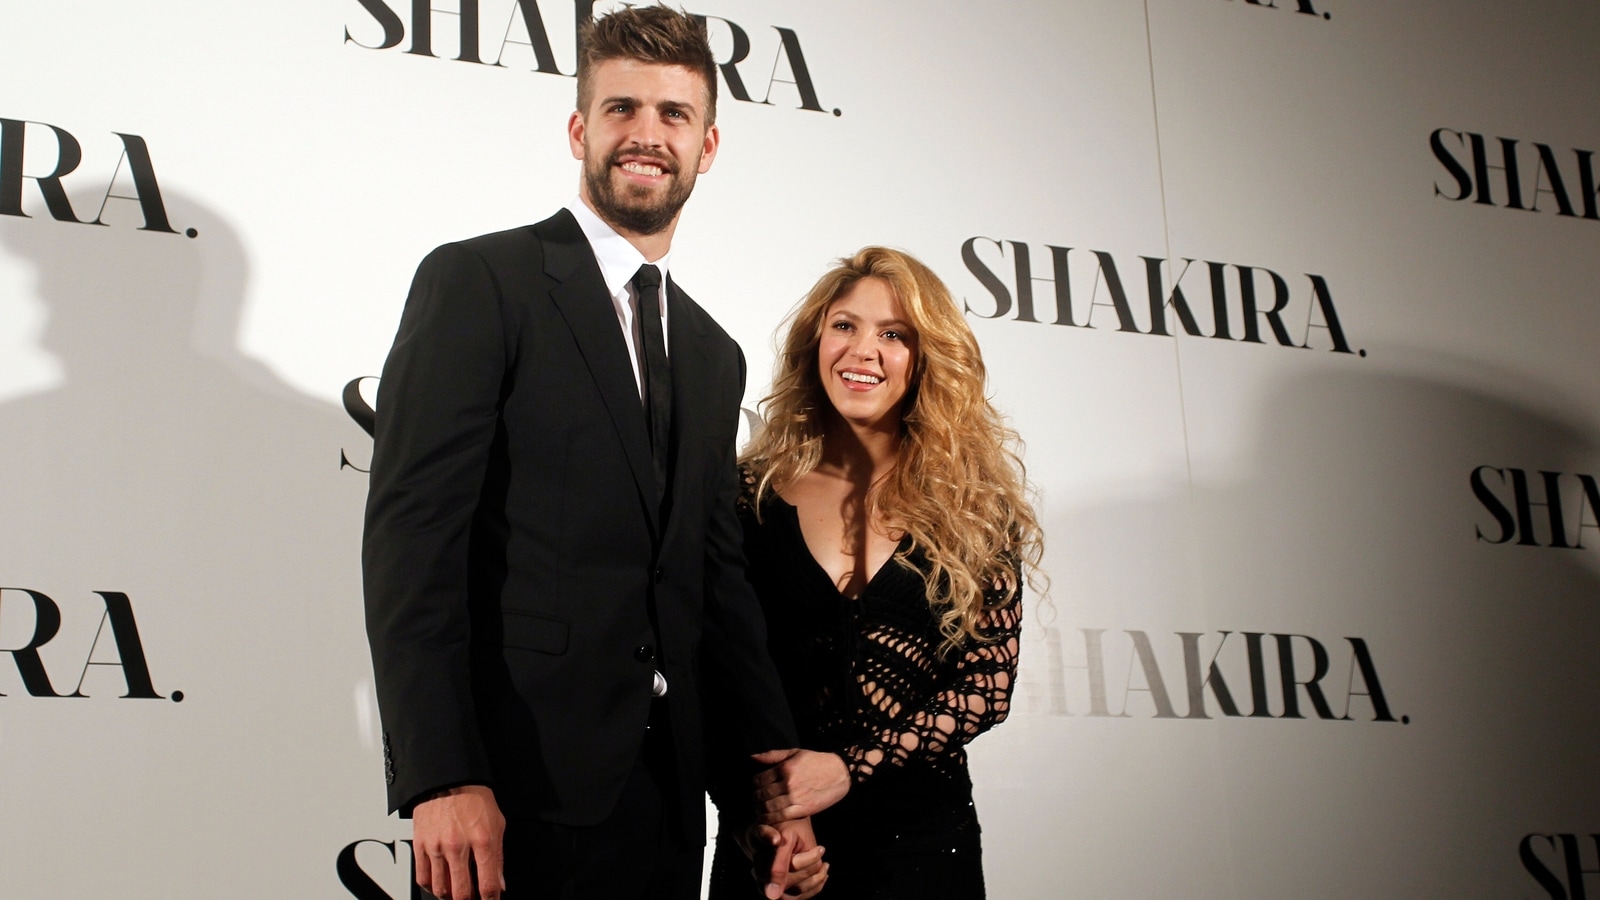 Shakira confirms split with soccer star Gerard Pique after 12 years: ‘We ask that you respect our privacy’